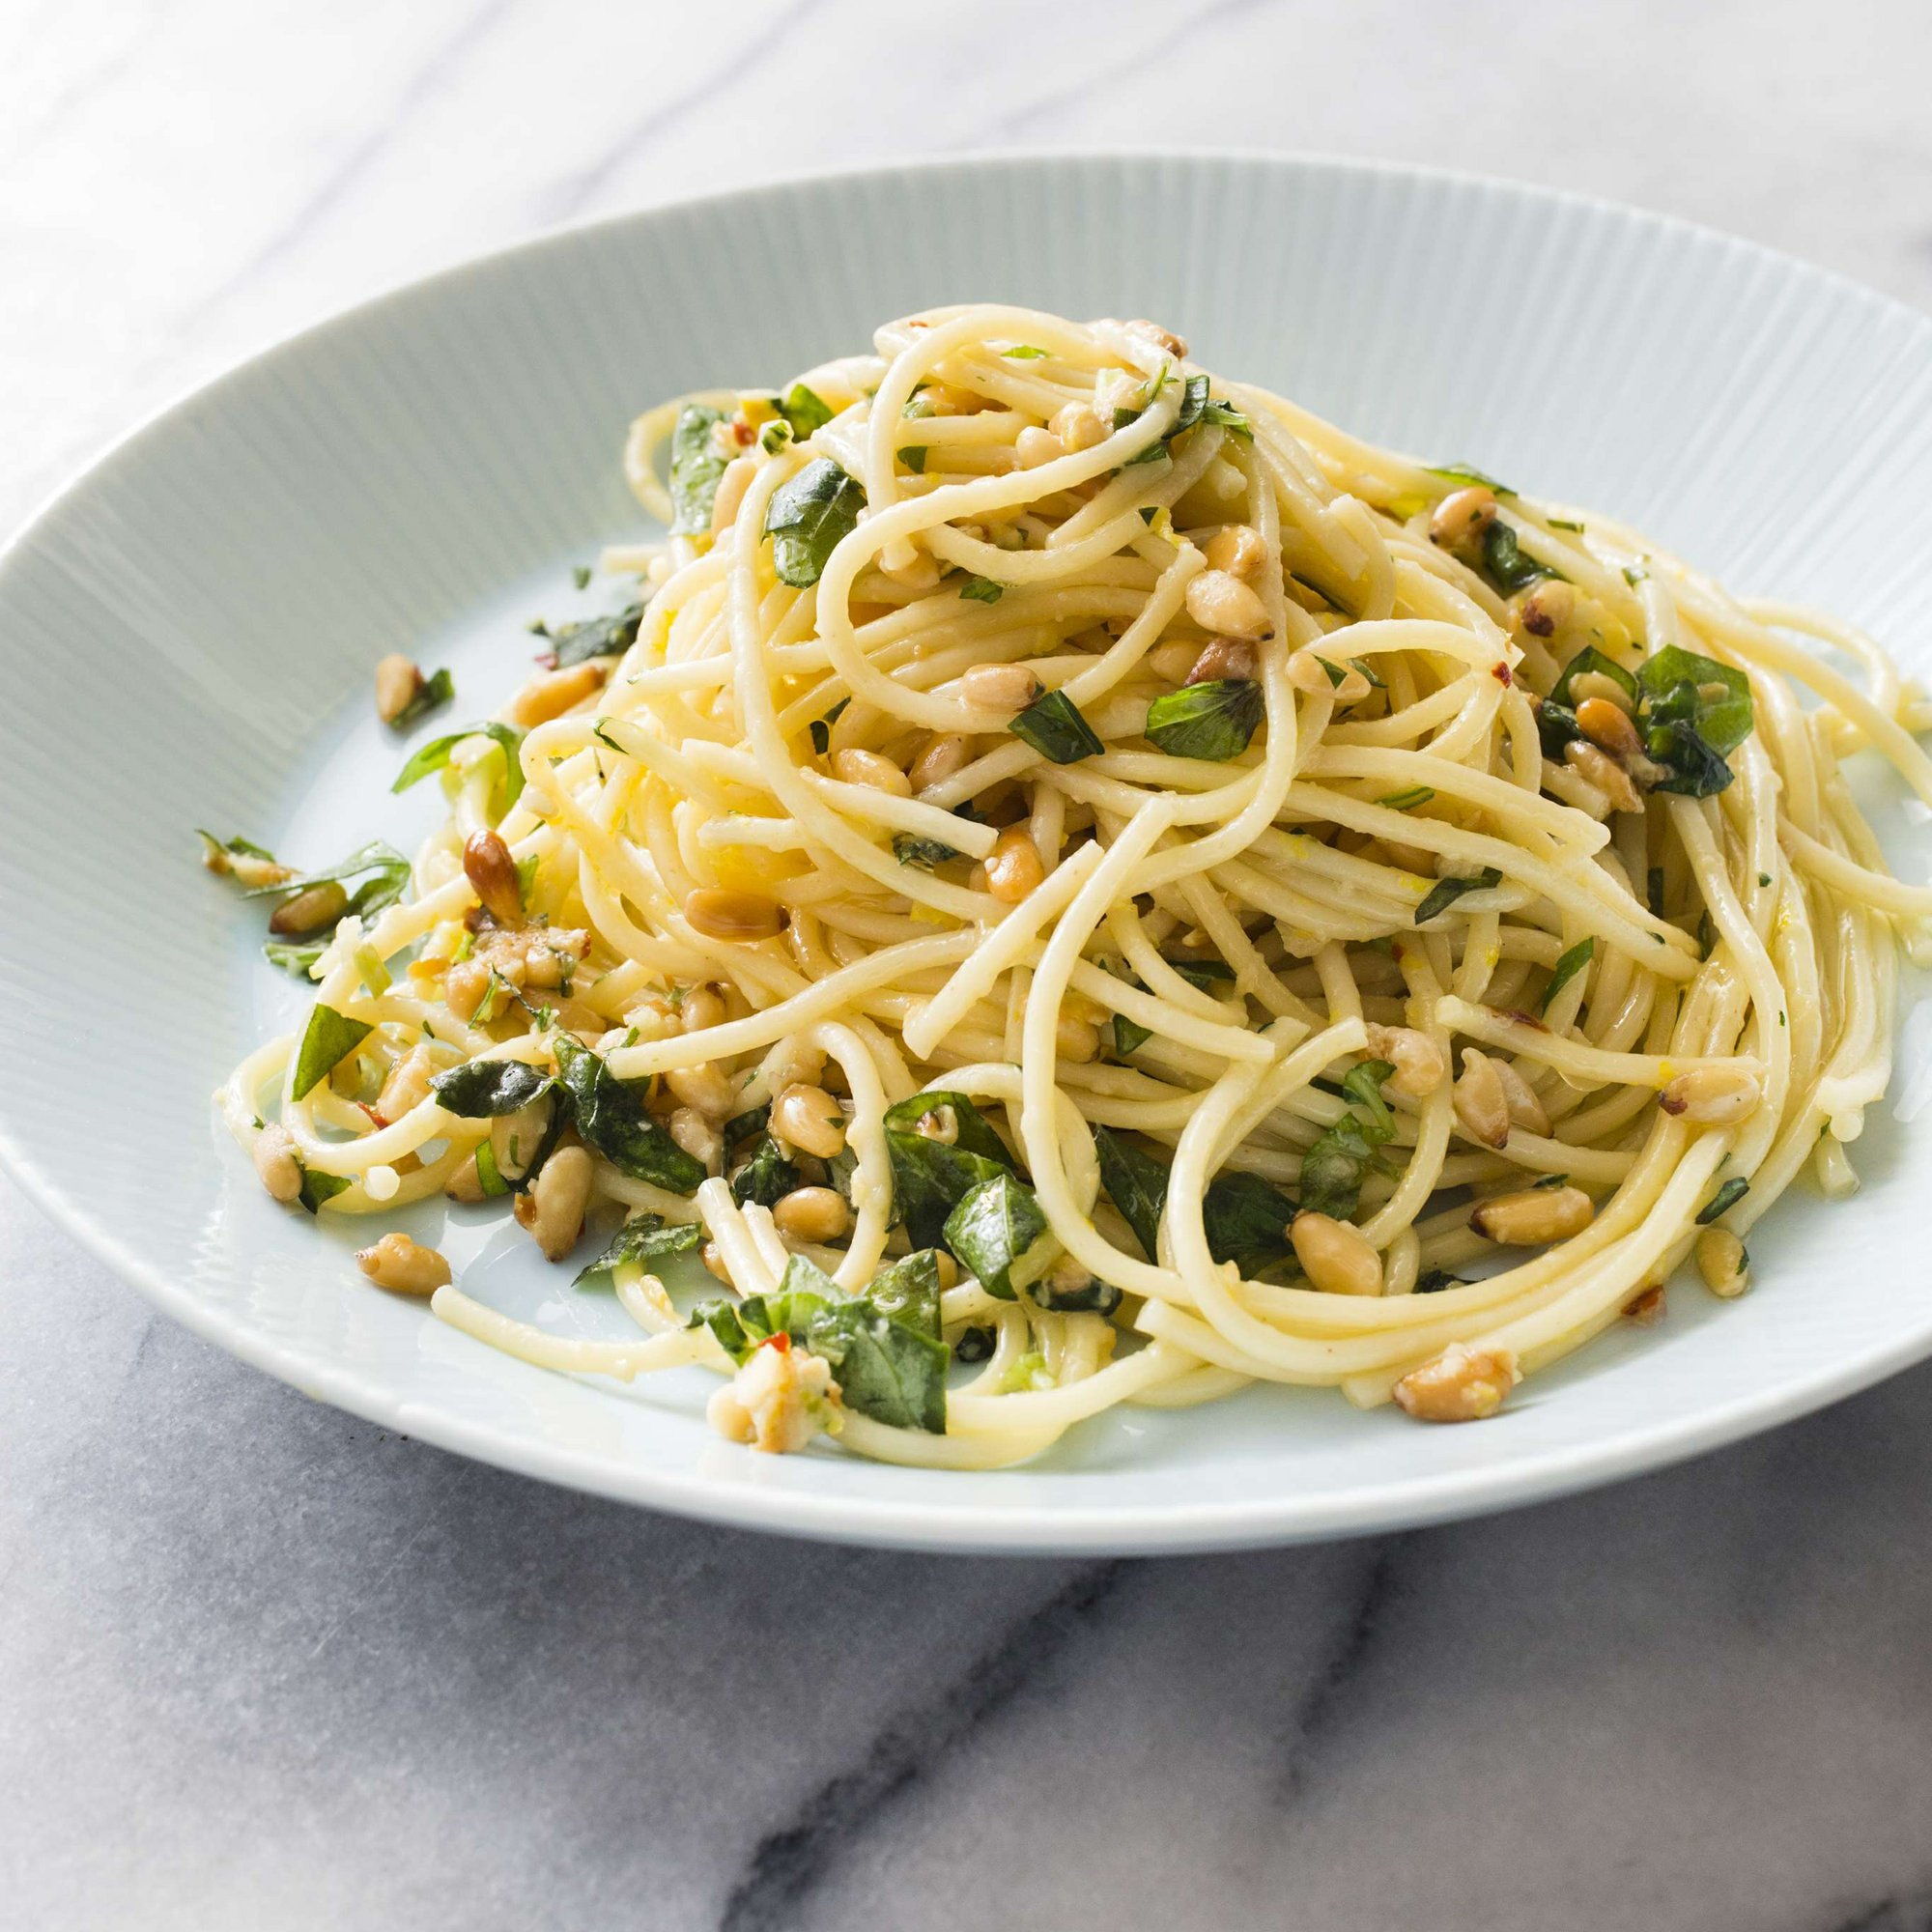 Tame your spaghetti monster with this easy garlicky dish